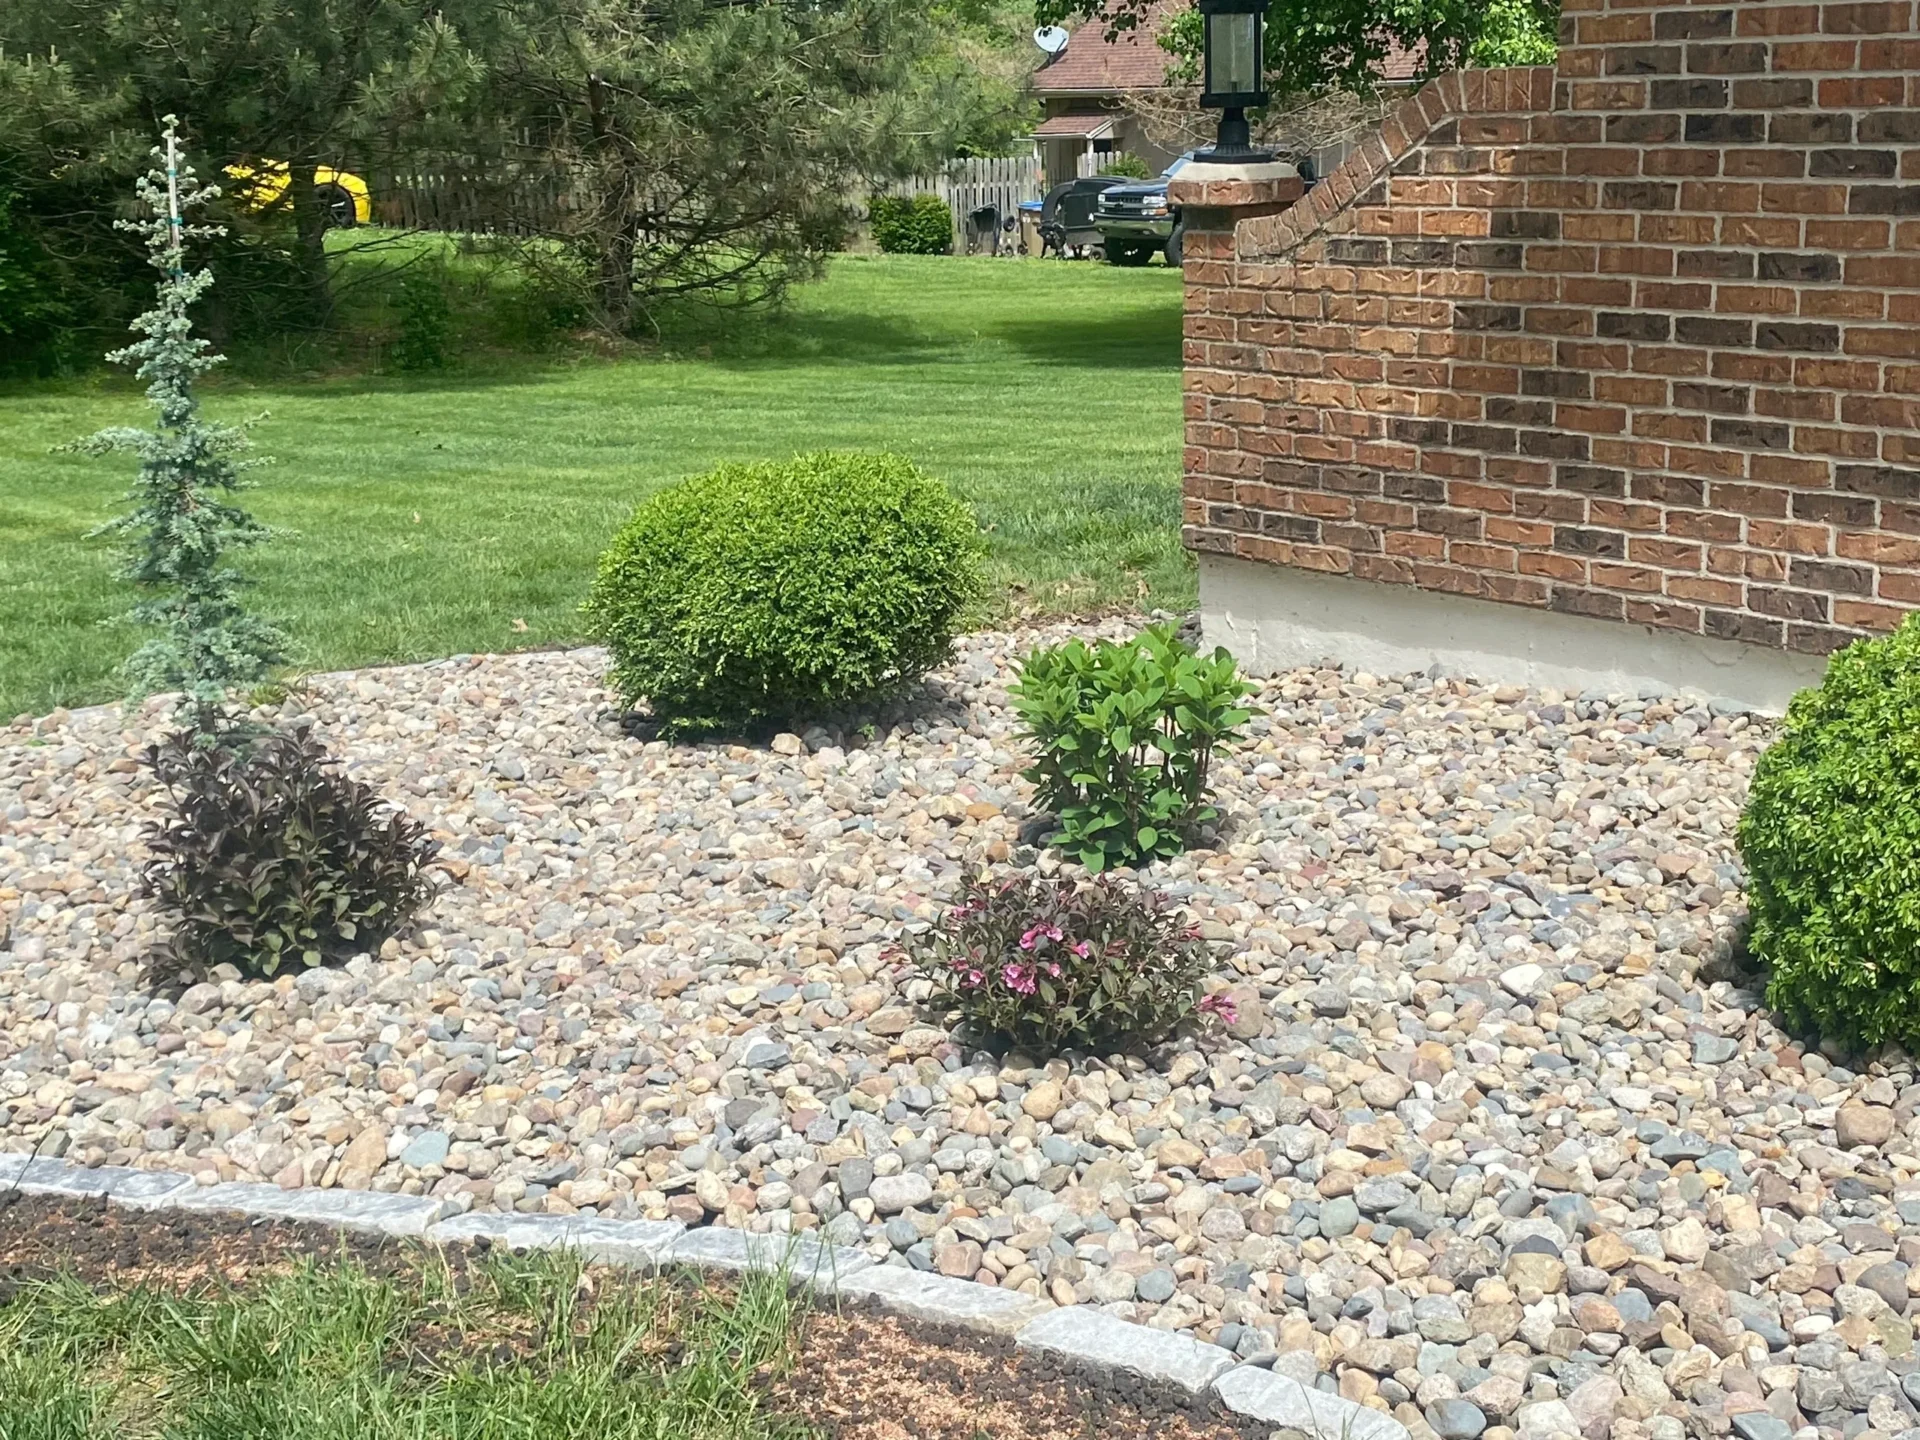 A garden with bushes and rocks in the yard.